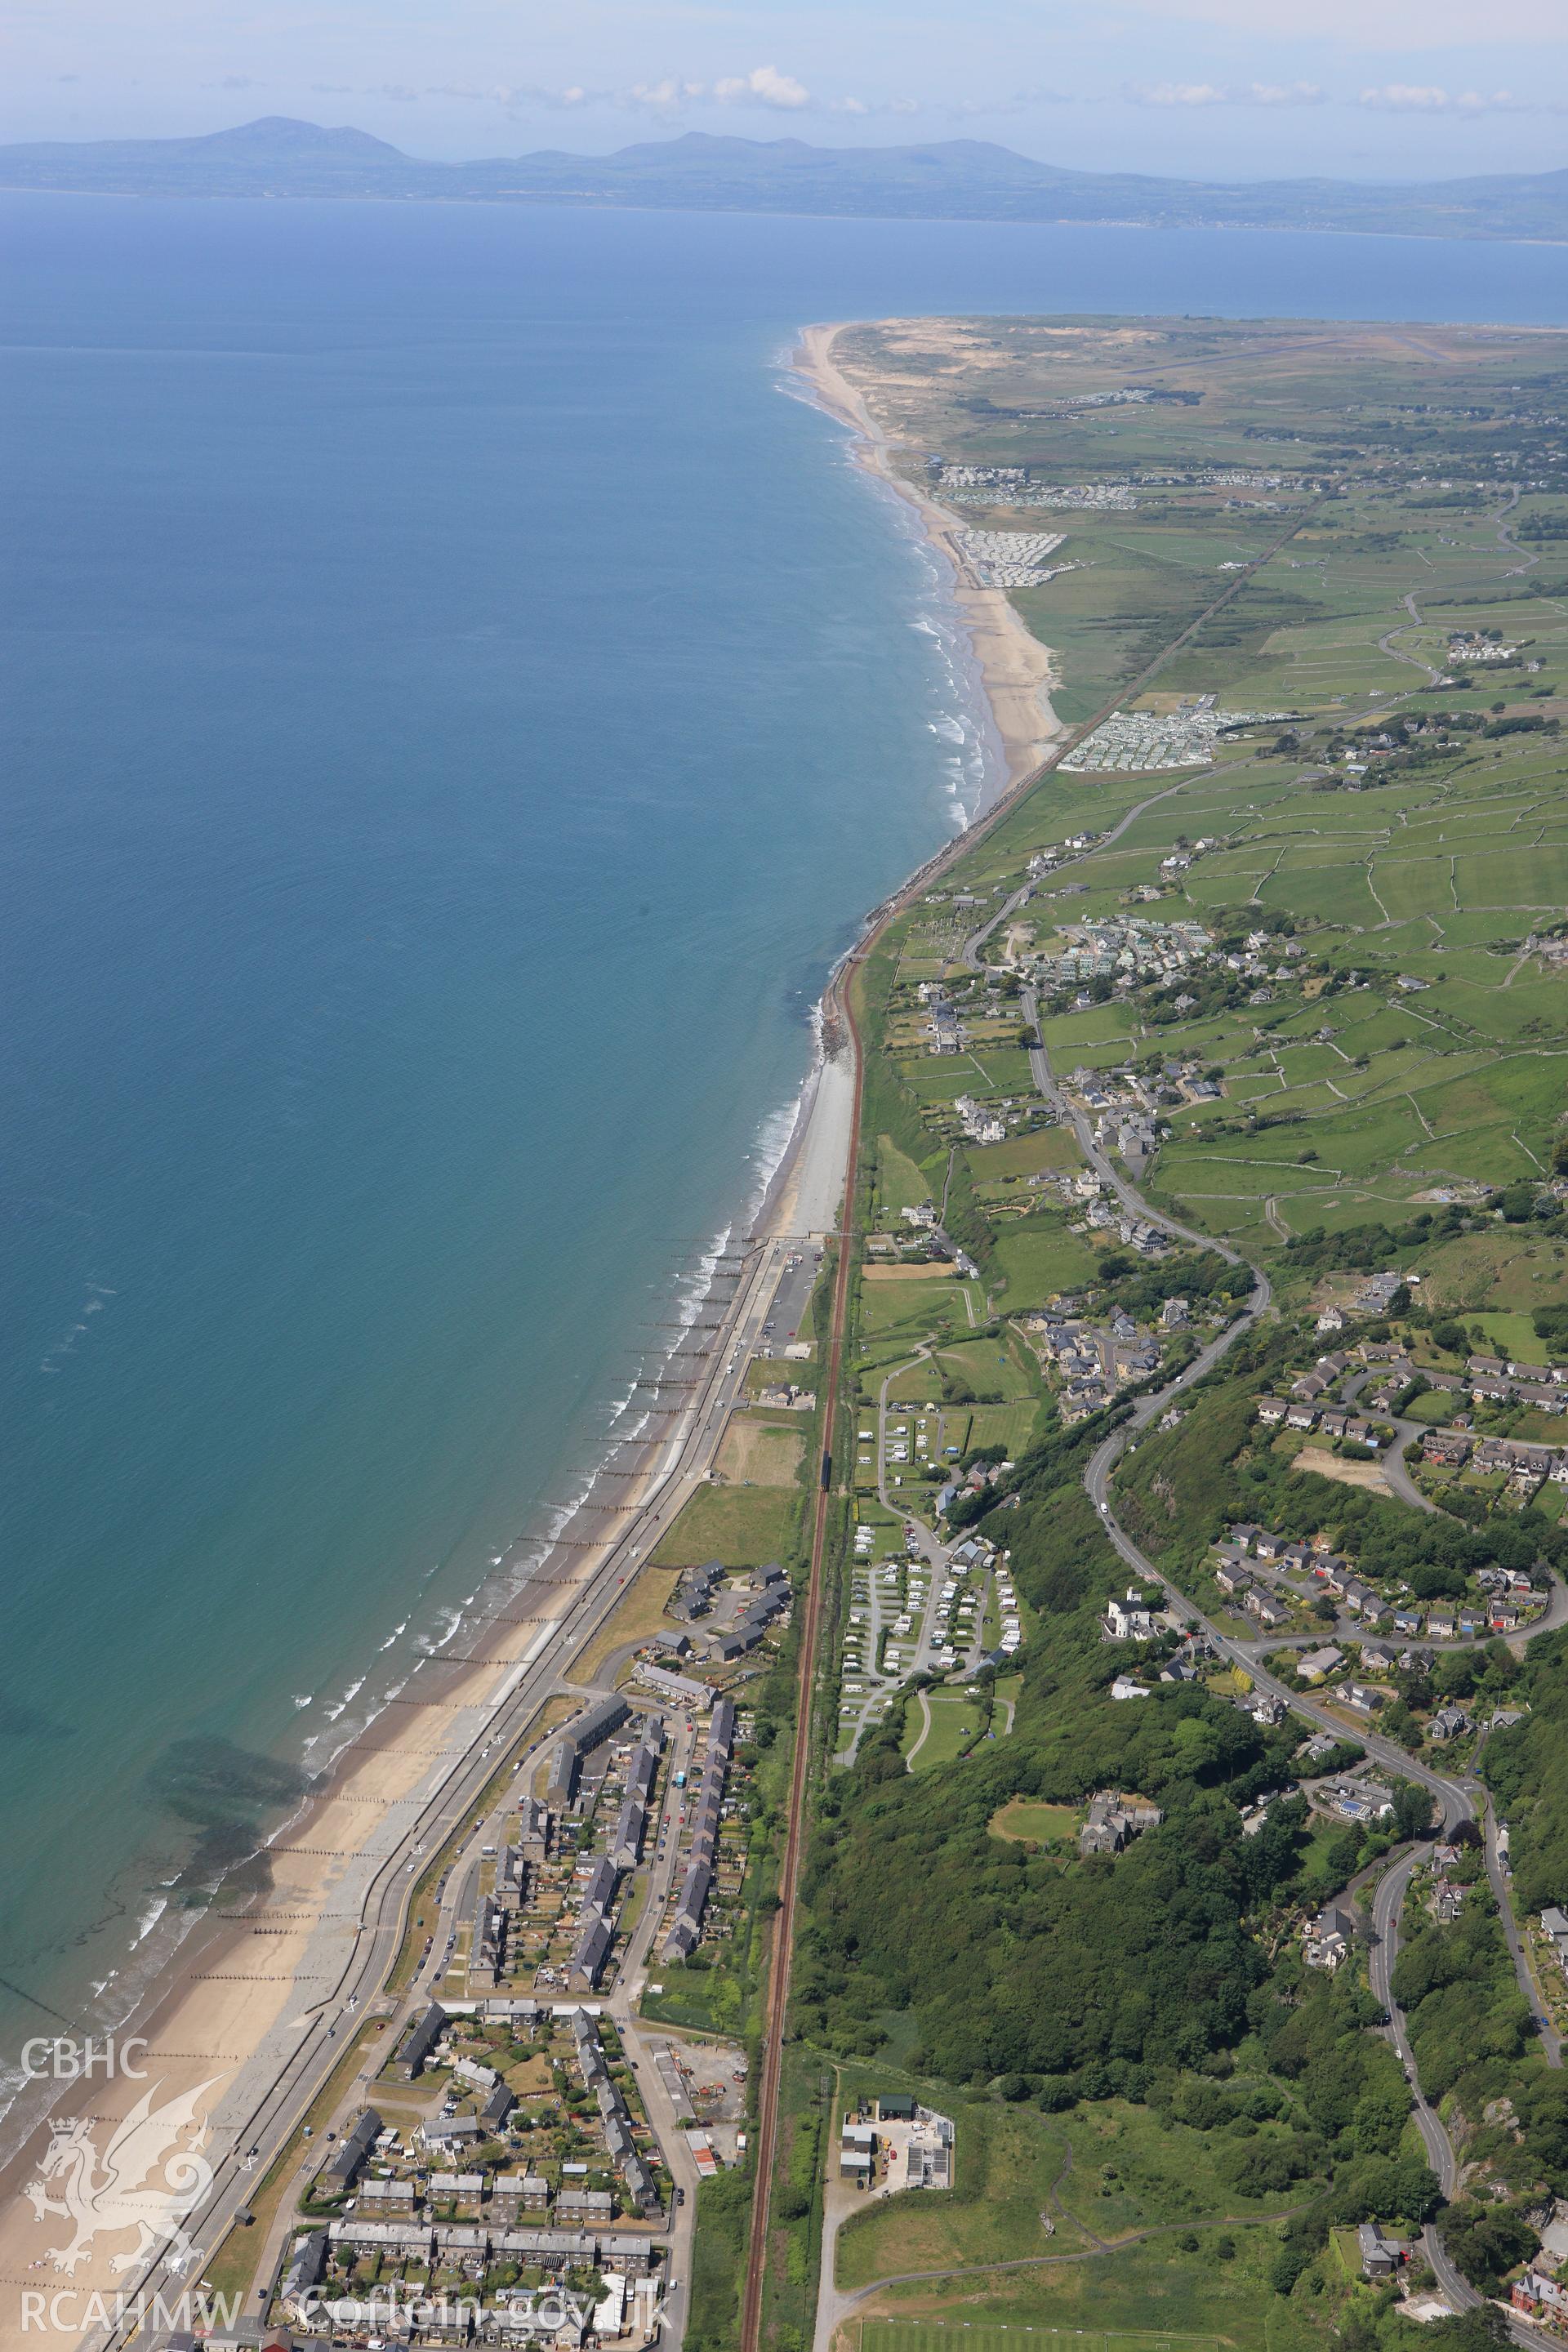 RCAHMW colour oblique aerial photograph of Barmouth looking towards the north. Taken on 16 June 2009 by Toby Driver